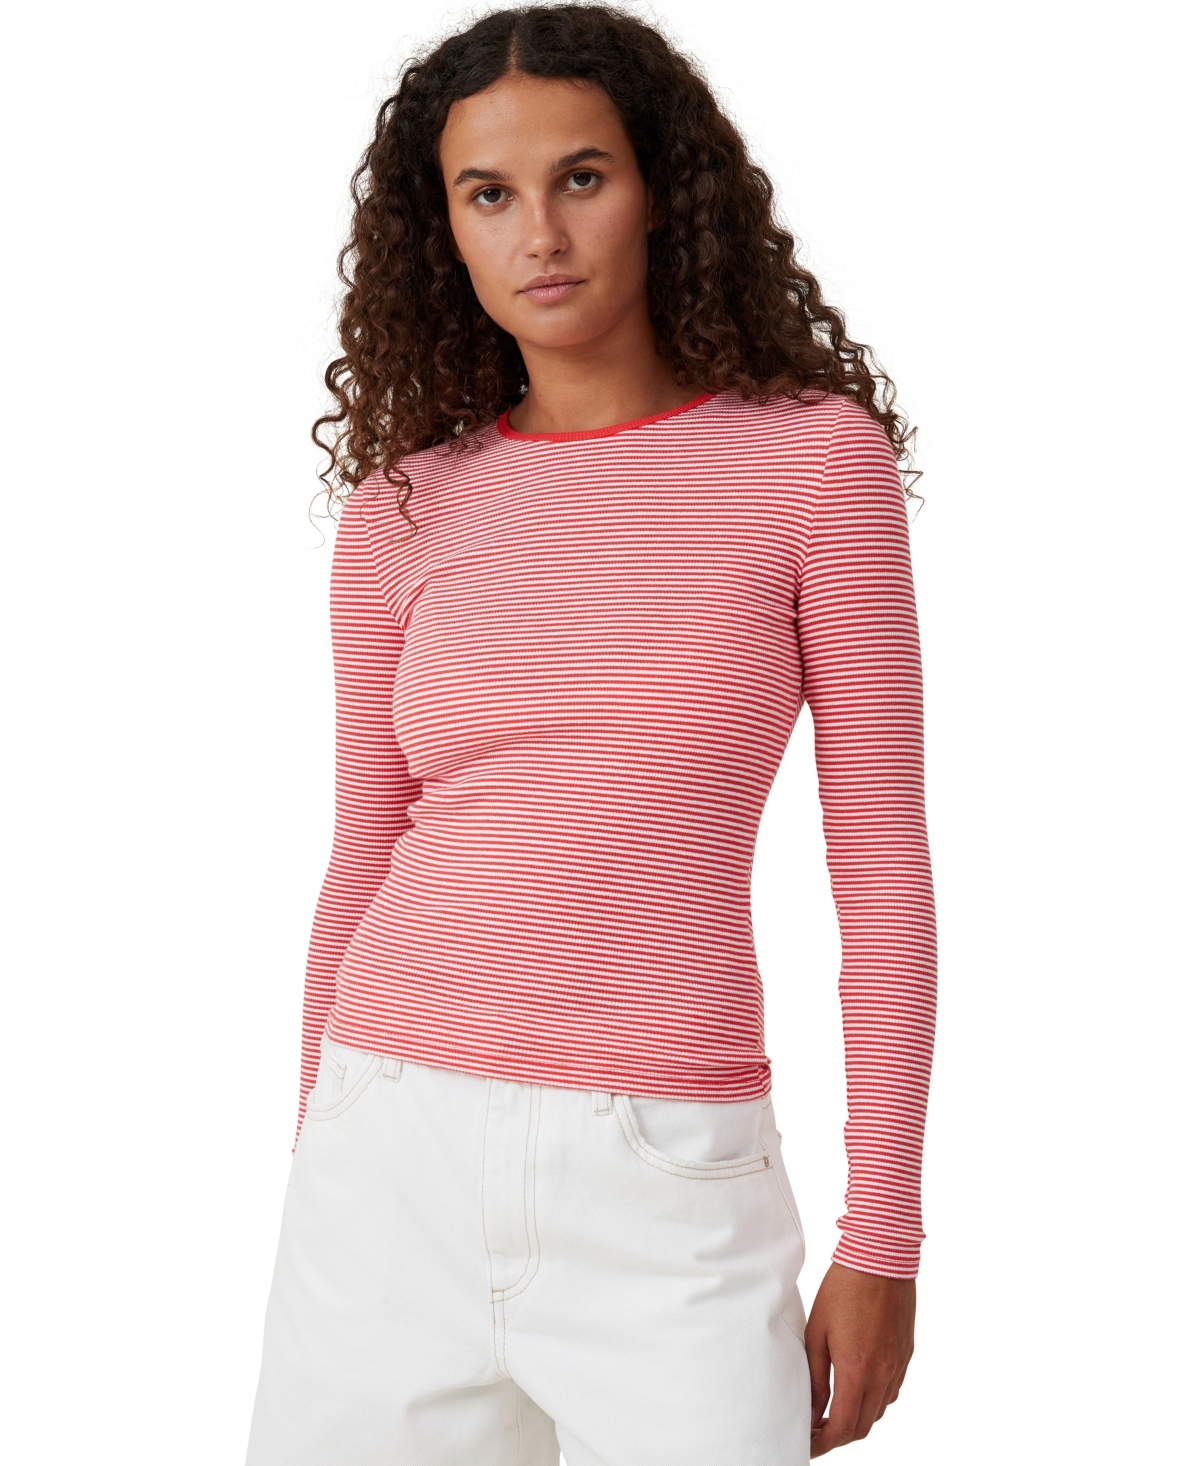 COTTON ON WOMEN'S THE ONE RIB CREW LONG SLEEVE TOP